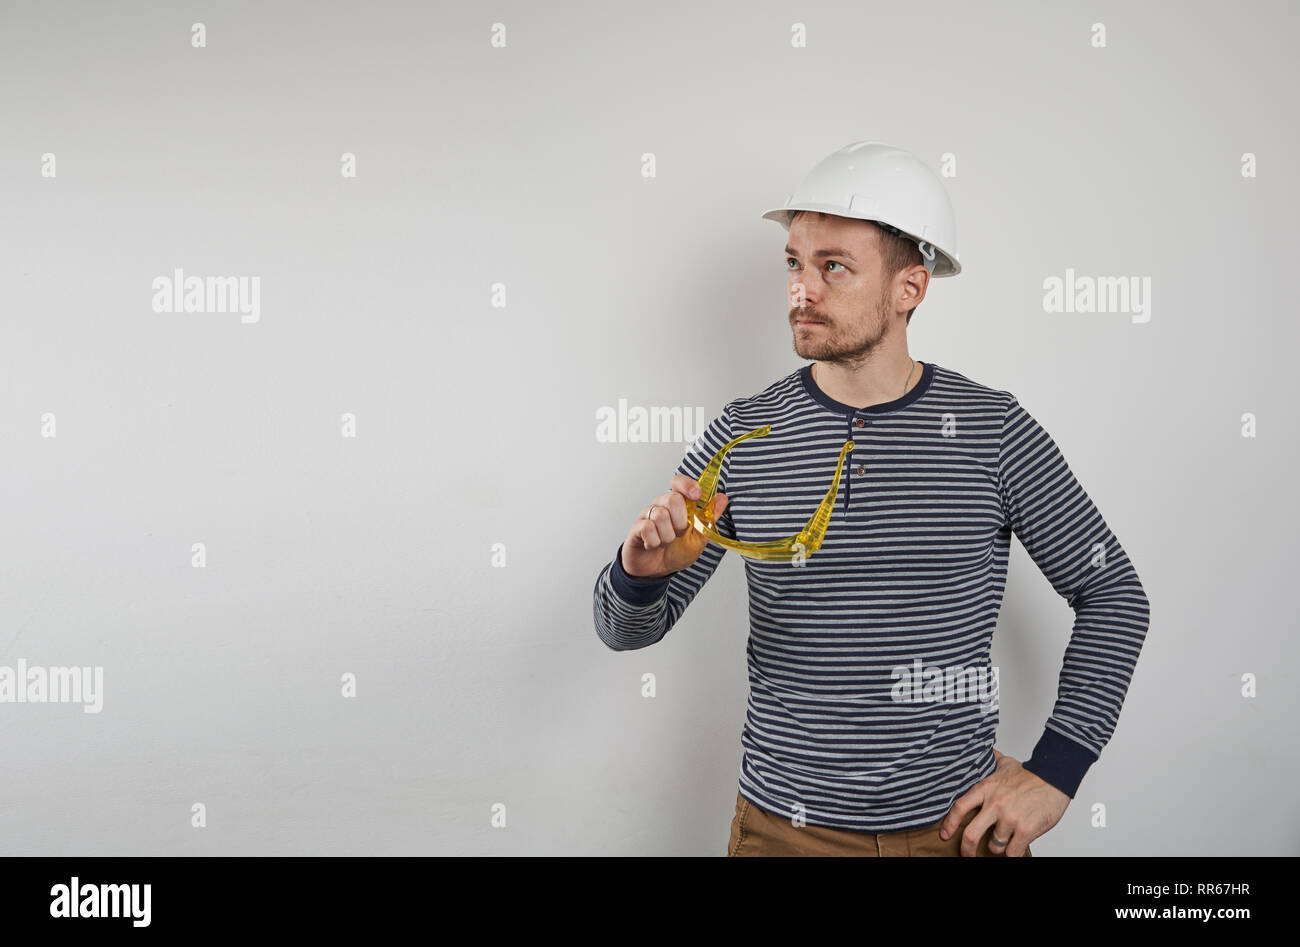 Builder in a helmet on a white background Stock Photo